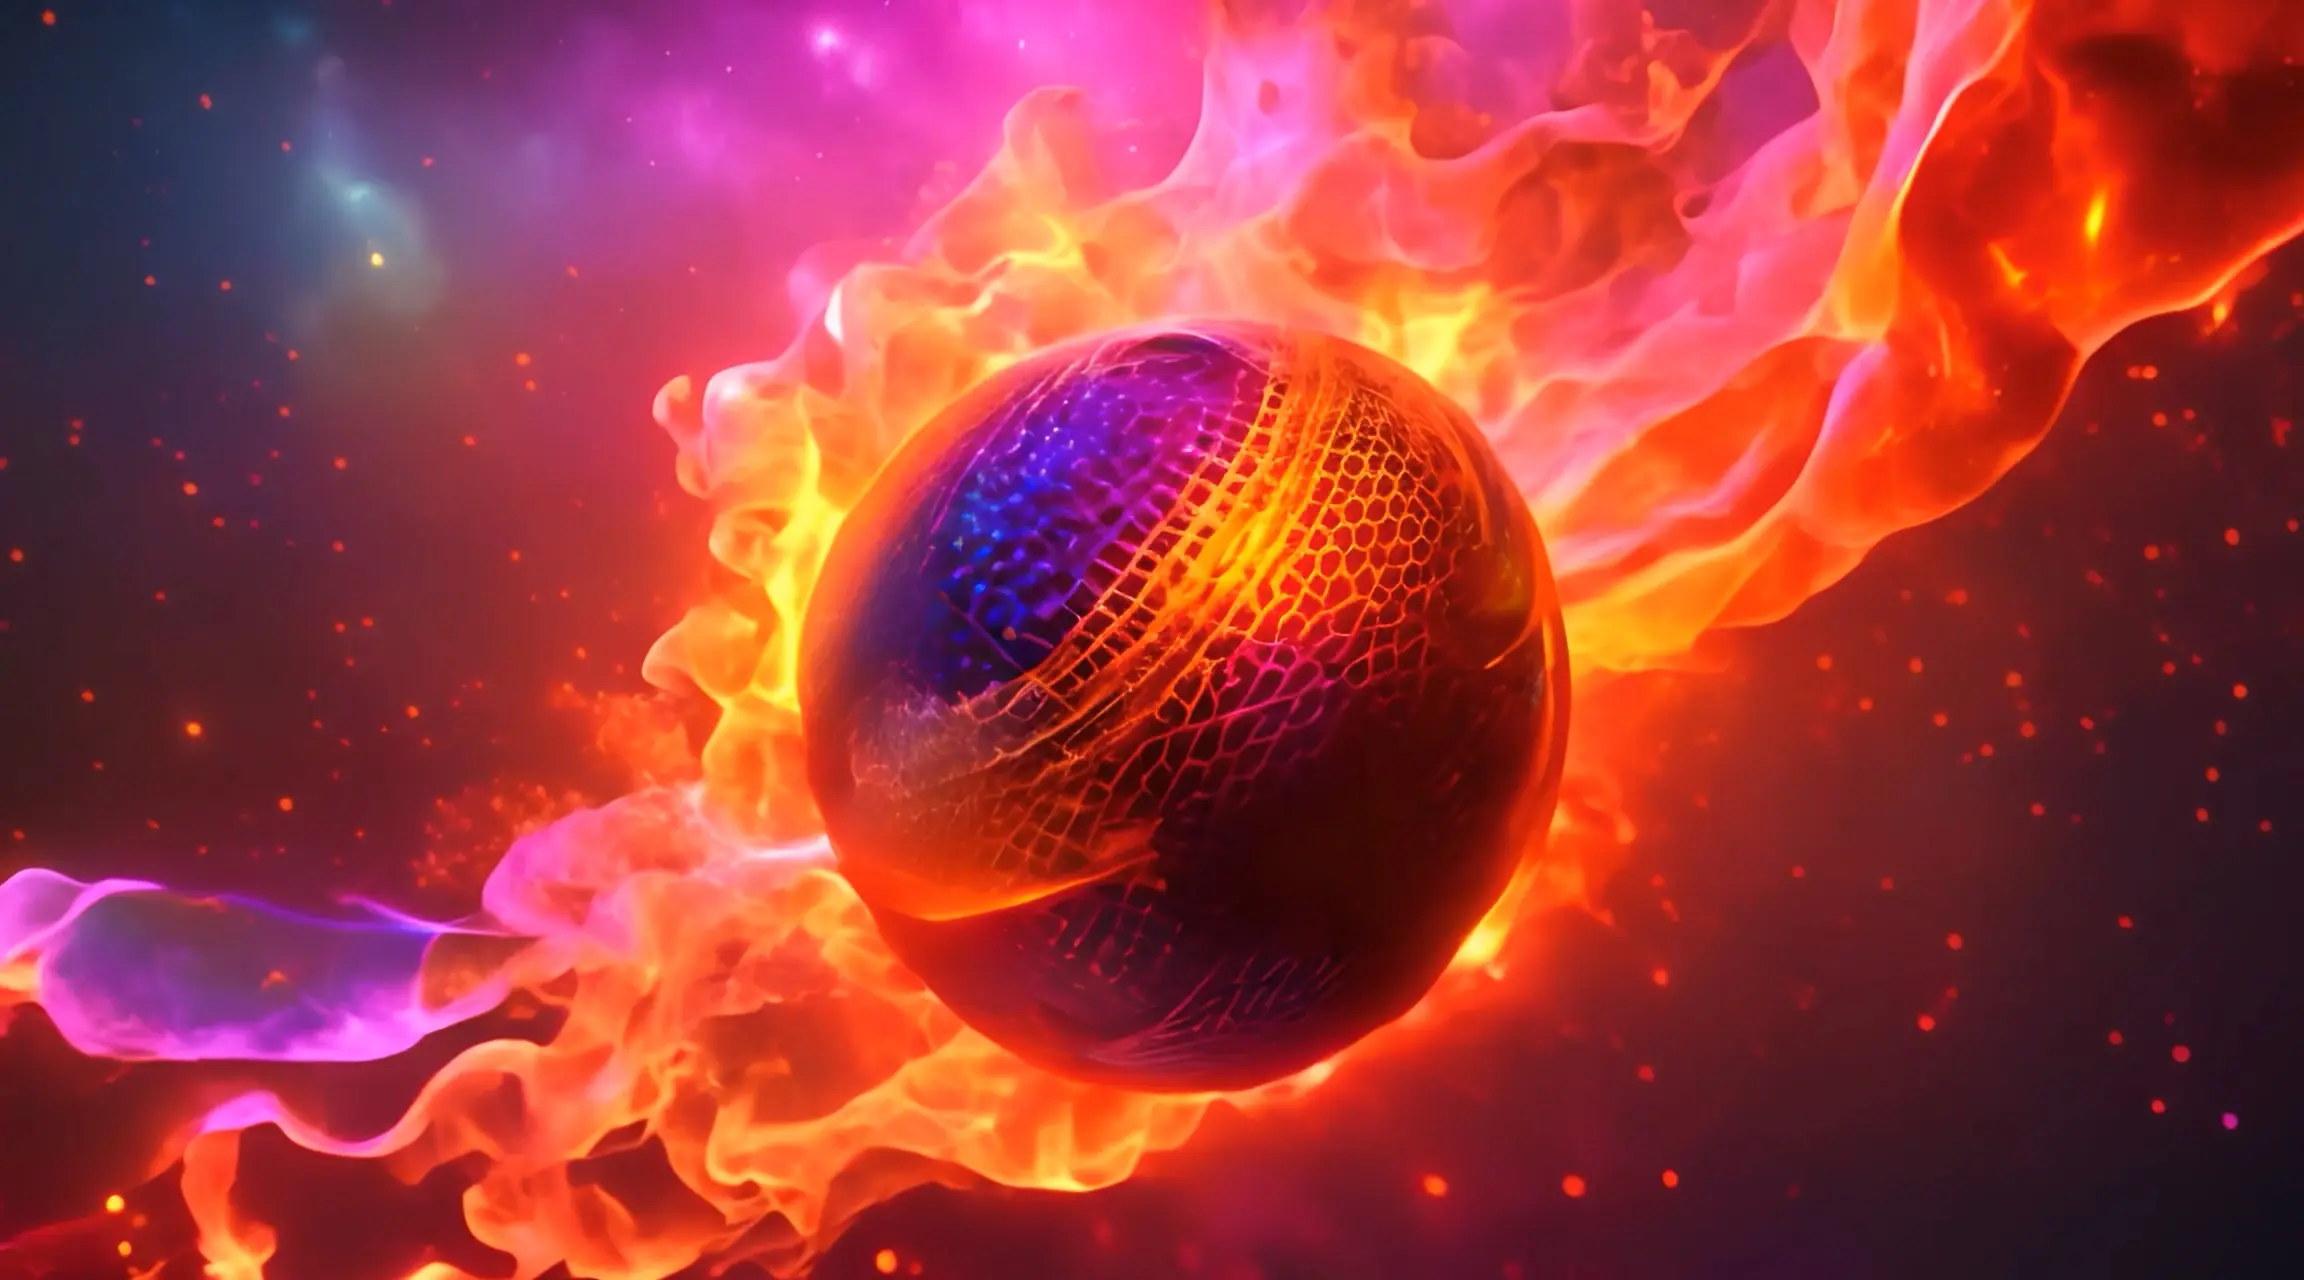 Sizzling Cosmic Ball High-Intensity Video Backdrop